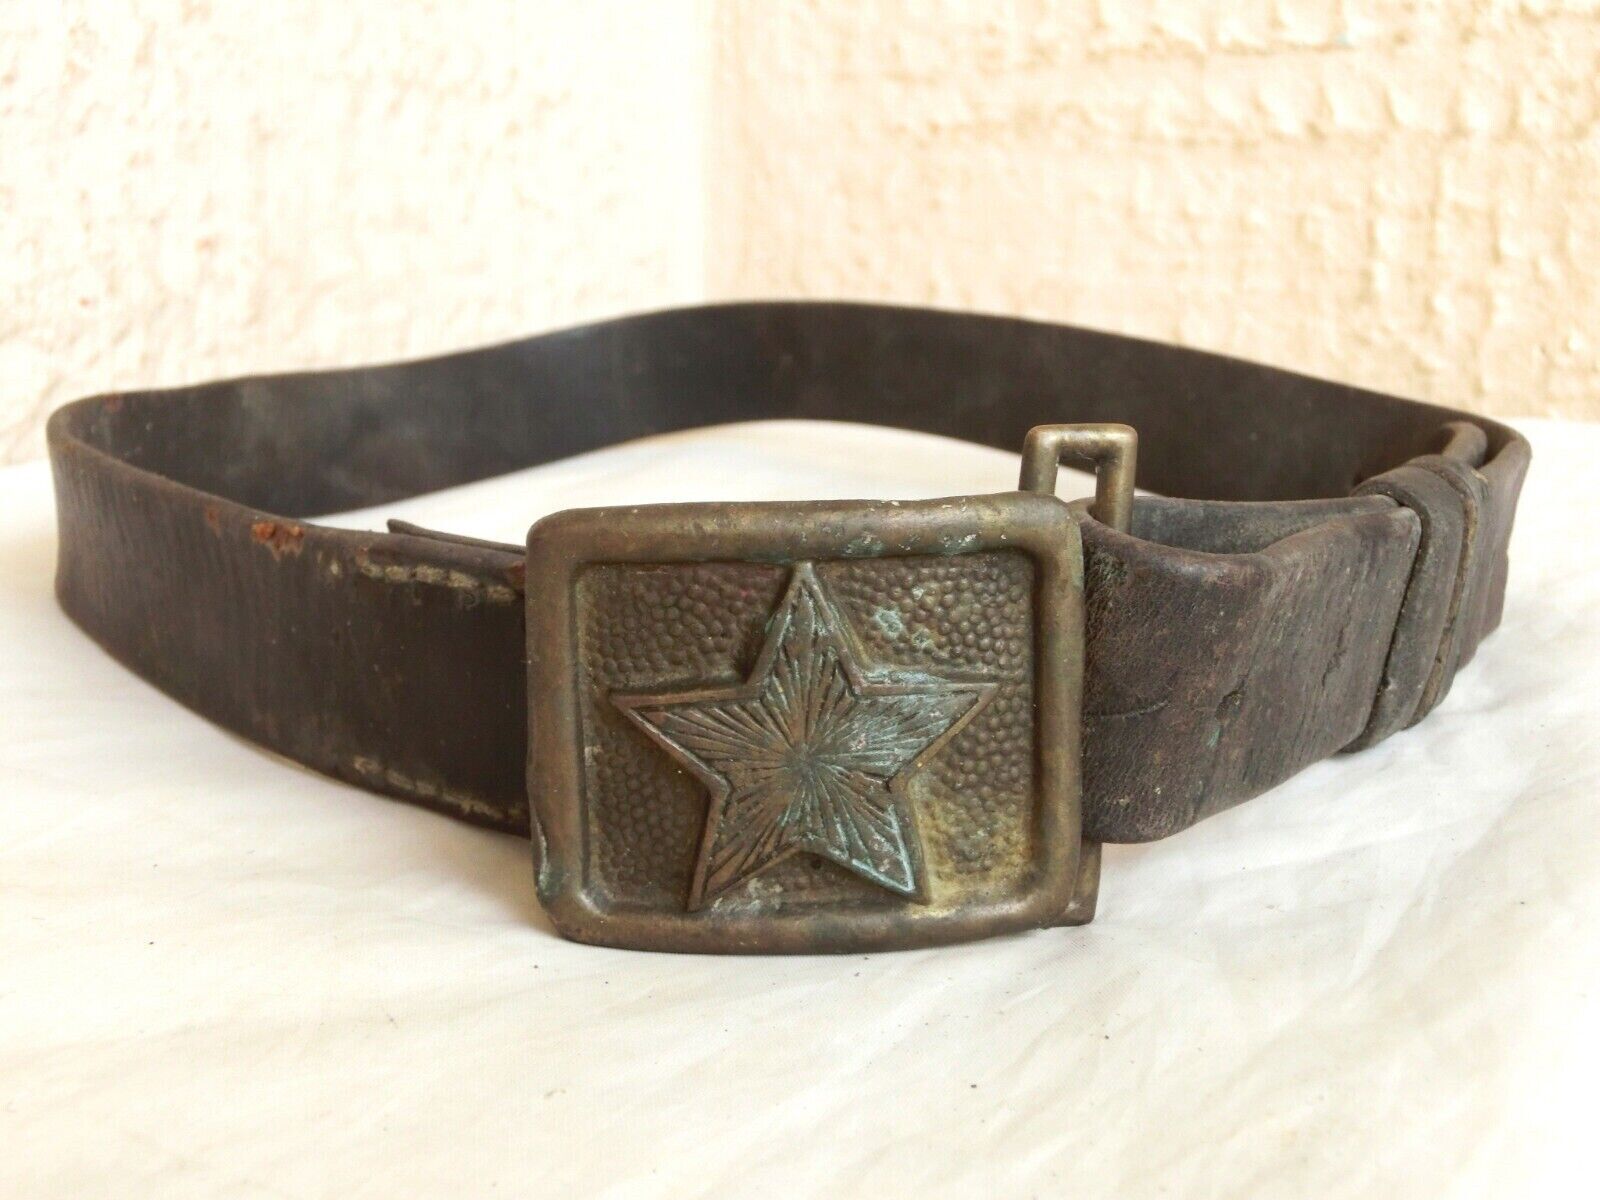 WW2 WWII MILITARY SOVIET RUSSIAN OFFICER LEATHER BELT w/ STAR on the BUCKLE  RRR